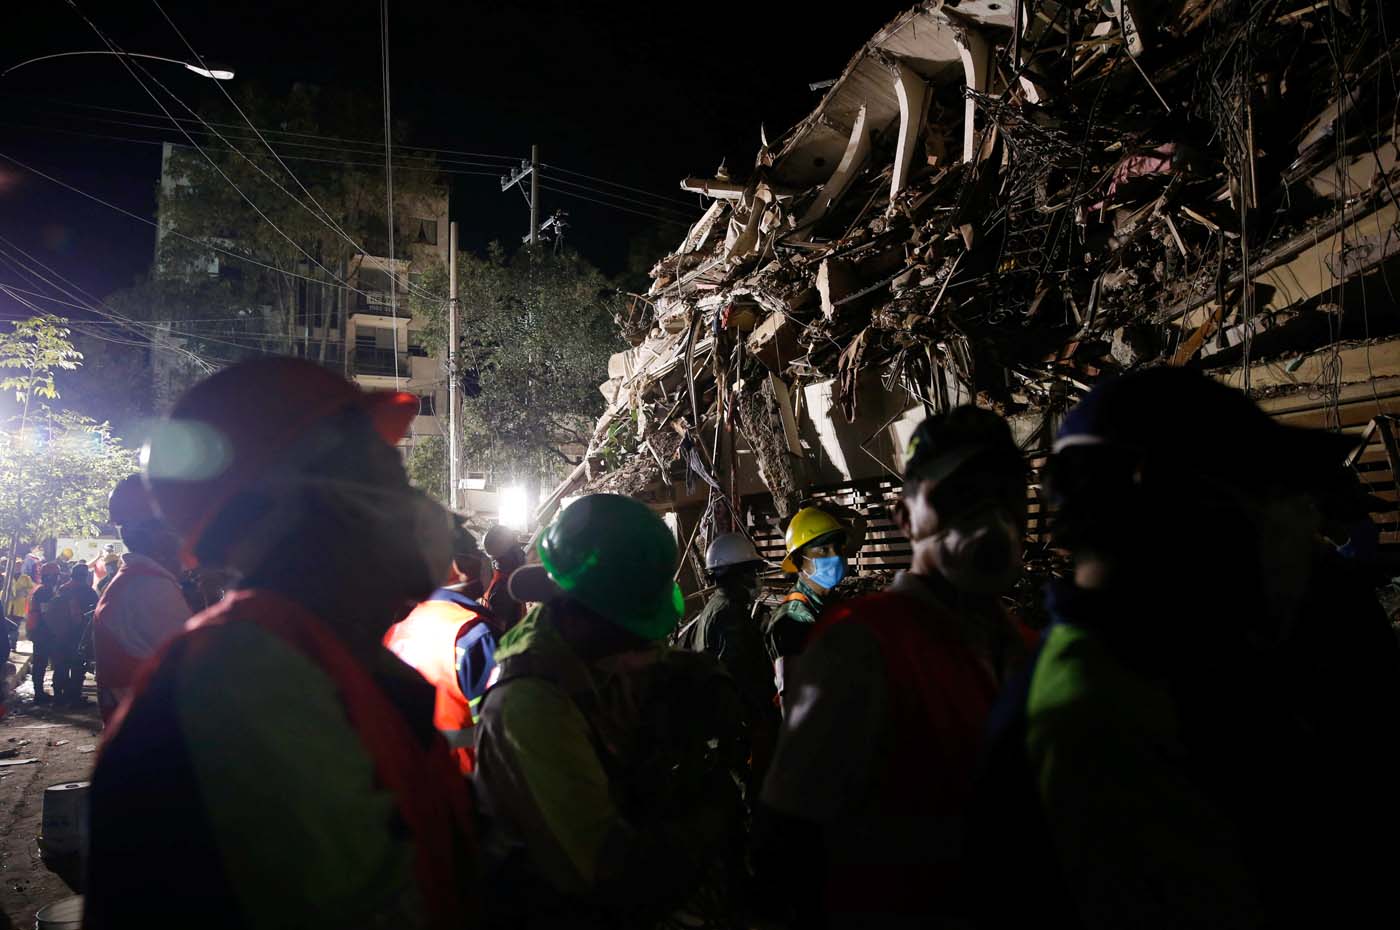 Rescuers work at the site of a collapsed building after an earthquake in Mexico City, Mexico September 20, 2017. REUTERS/Henry Romero